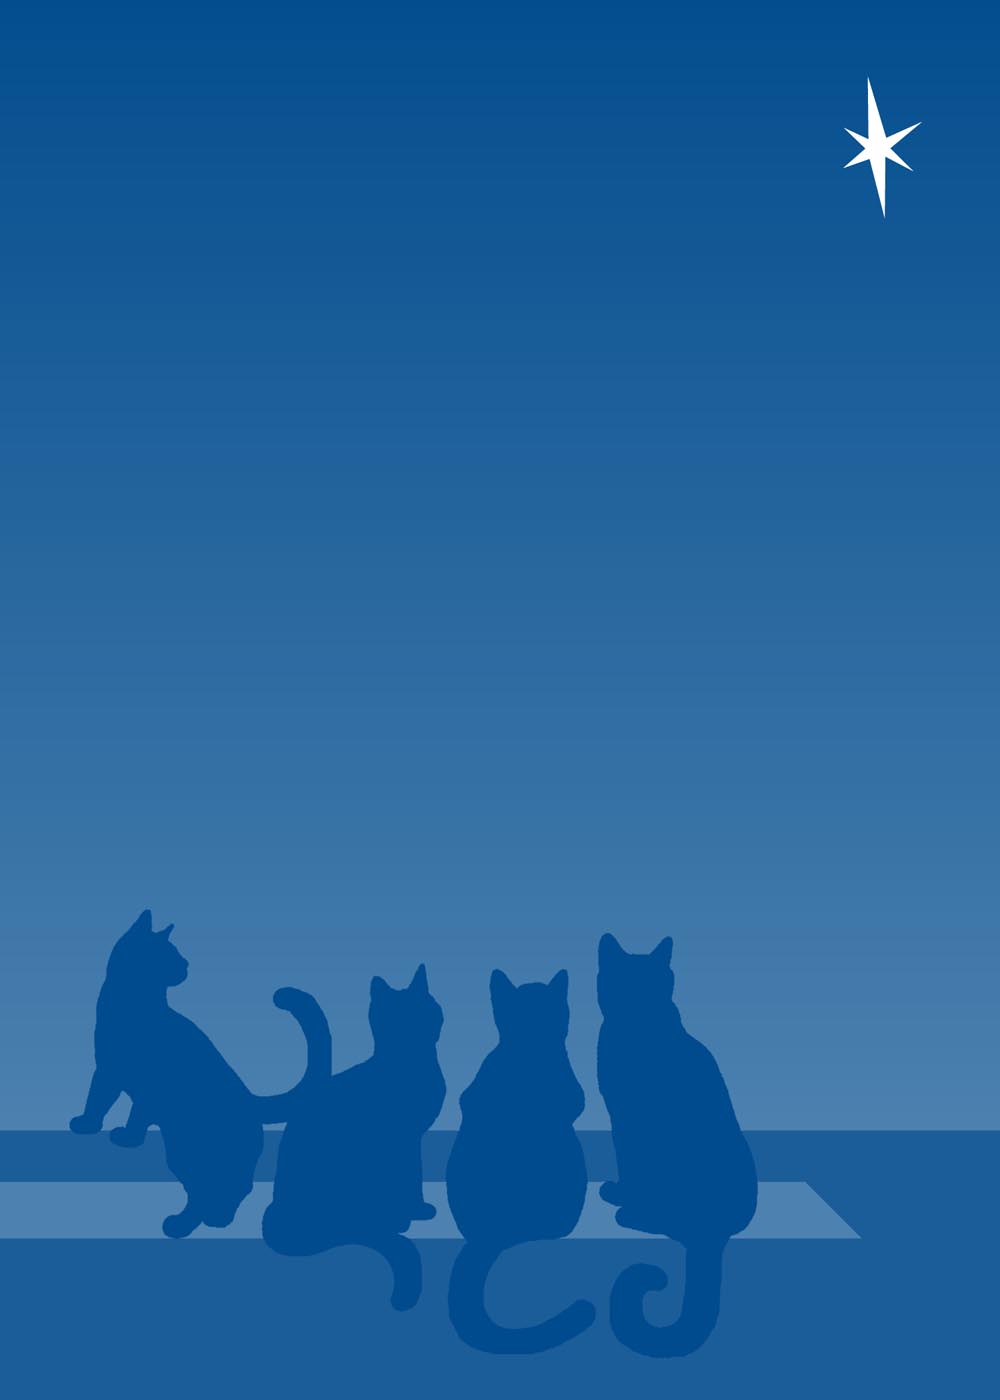 design with four kittens looking at star